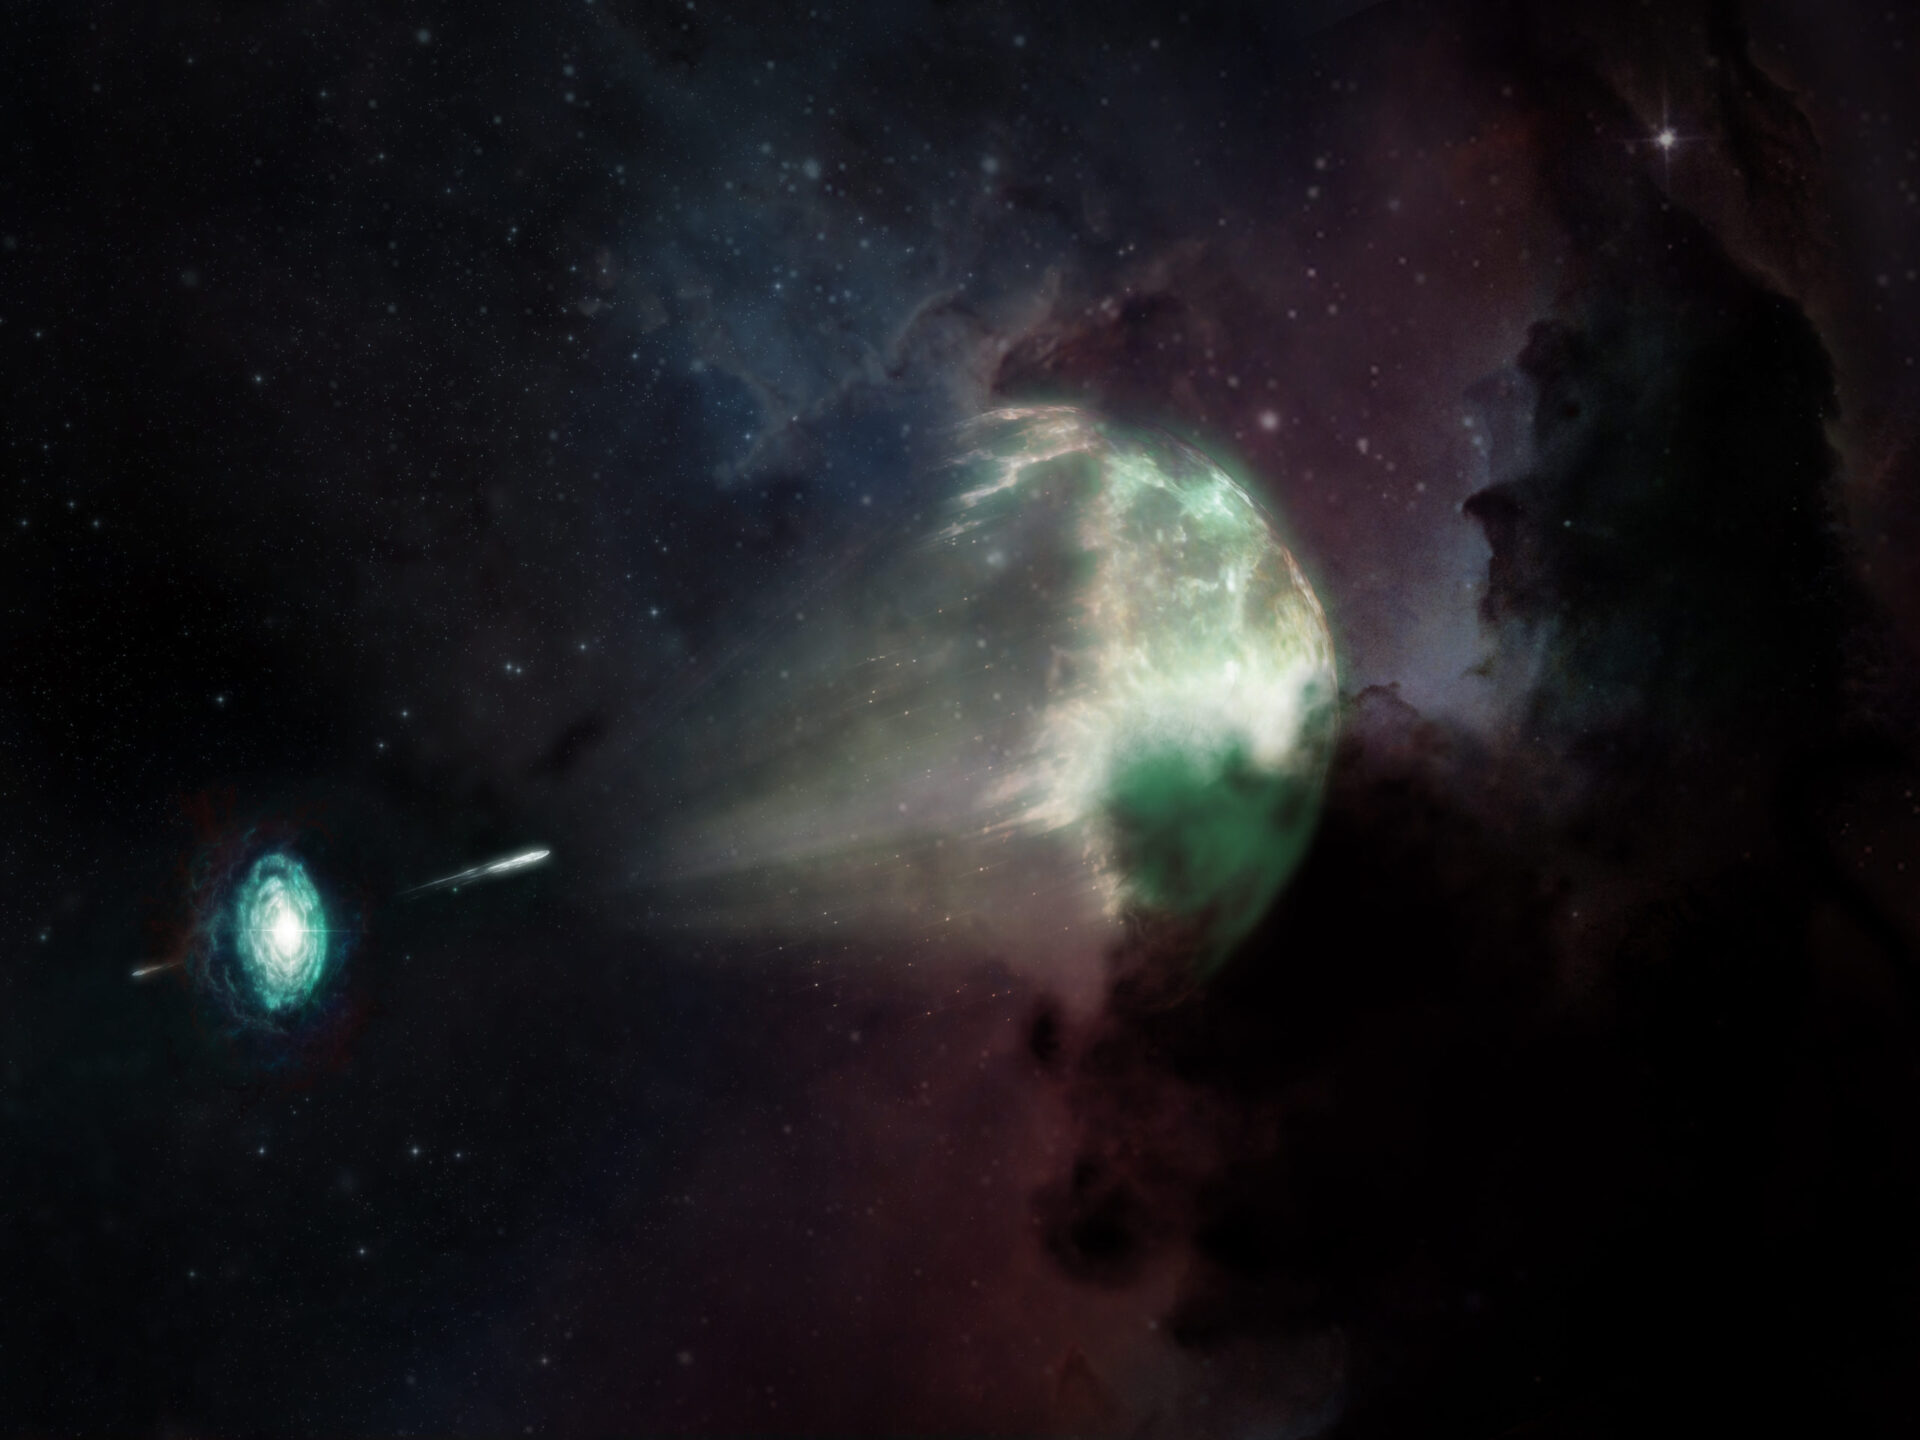 Artist's conception of a short-duration gamma-ray burst